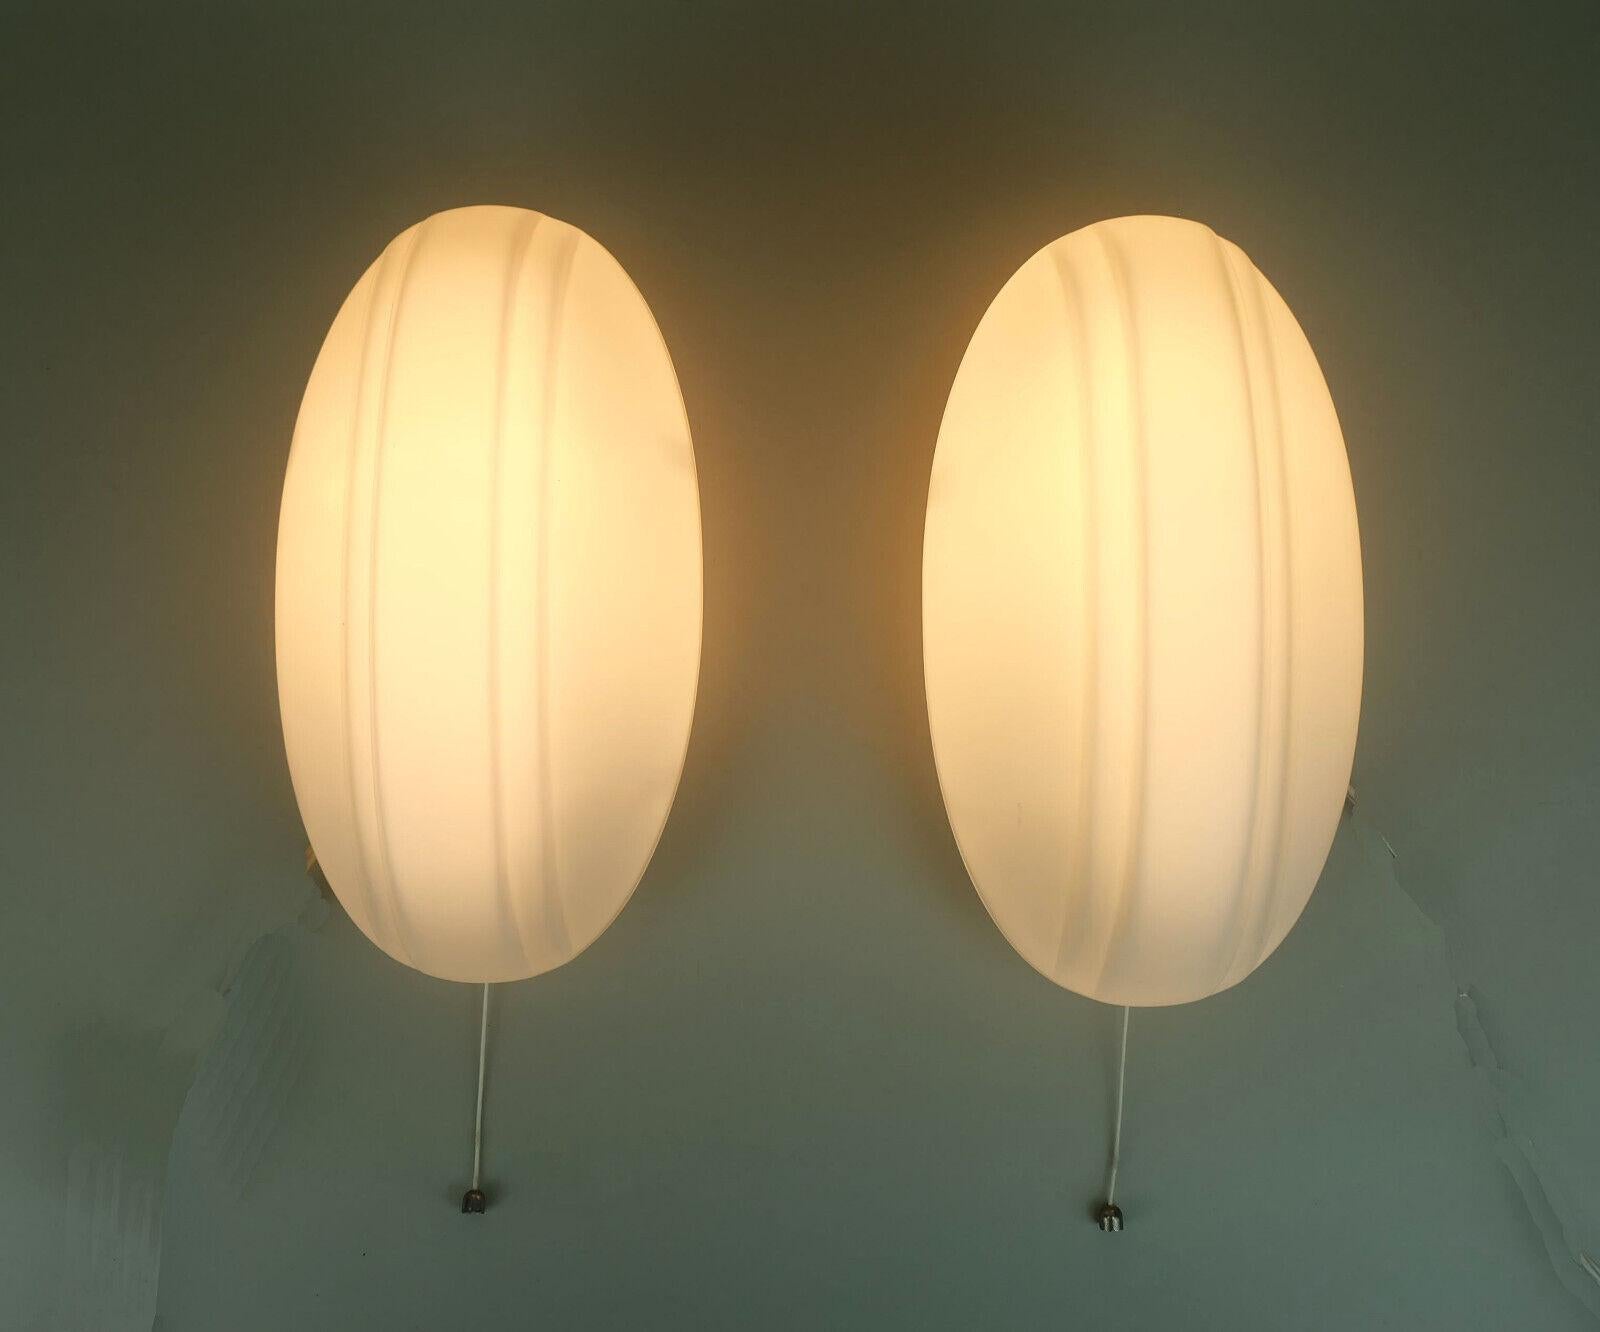 Pair of 1970s 80s sconces manufactured by Putzler. Matt white opaline glass shades, base white lacquered metal. Holds 1 E27 light bulb each.

A matching flush mount is available.

Dimensions in cm: 
Length 25.5 cm, width 14 cm, depth 12